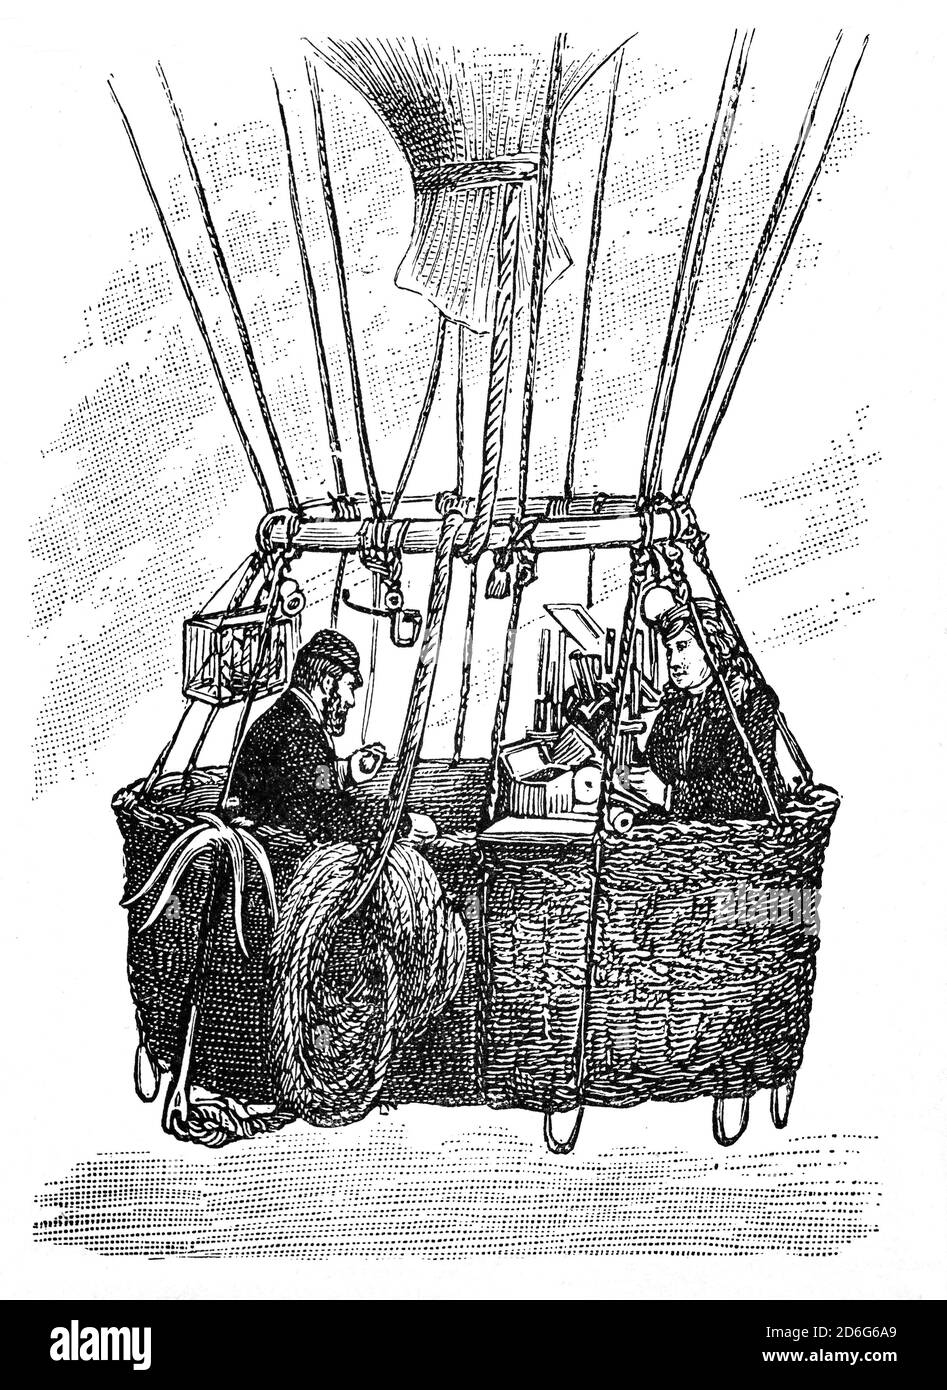 British scientist Henry Coxwell and Dr. James Glaisher taking direct scientific measurements for the study of weather and rain in their balloon on September 5, 1862. It appears that they sailed tens of thousands of feet into the skies with no idea of the extreme cold to be encountered at upper altitudes, or the thinning oxygen levels and the two woefully under-prepared men nearly died. Stock Photo